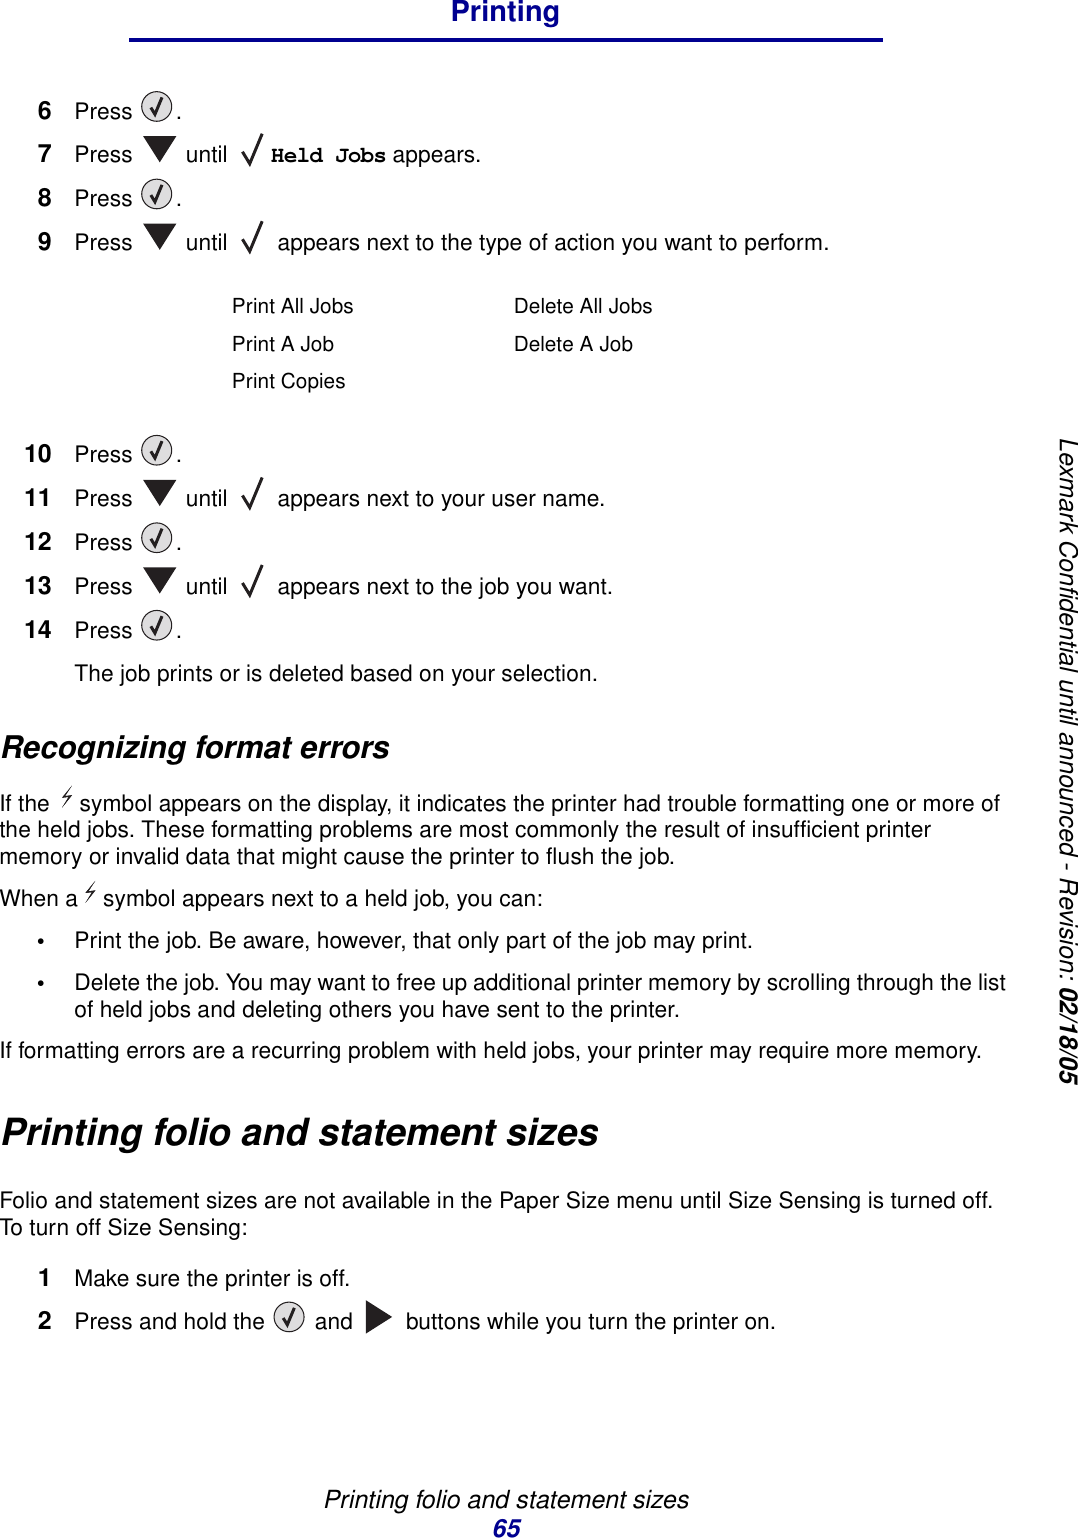 Printing folio and statement sizes65PrintingLexmark Confidential until announced - Revision: 02/18/056Press .7Press  until Held Jobs appears.8Press .9Press   until   appears next to the type of action you want to perform.10 Press .11 Press   until   appears next to your user name.12 Press .13 Press   until   appears next to the job you want.14 Press .The job prints or is deleted based on your selection.Recognizing format errorsIf the symbol appears on the display, it indicates the printer had trouble formatting one or more of the held jobs. These formatting problems are most commonly the result of insufficient printer memory or invalid data that might cause the printer to flush the job. When a symbol appears next to a held job, you can:•Print the job. Be aware, however, that only part of the job may print.•Delete the job. You may want to free up additional printer memory by scrolling through the list of held jobs and deleting others you have sent to the printer. If formatting errors are a recurring problem with held jobs, your printer may require more memory.Printing folio and statement sizesFolio and statement sizes are not available in the Paper Size menu until Size Sensing is turned off. To turn off Size Sensing:1Make sure the printer is off.2Press and hold the   and   buttons while you turn the printer on.Print All Jobs Delete All JobsPrint A Job Delete A JobPrint Copies